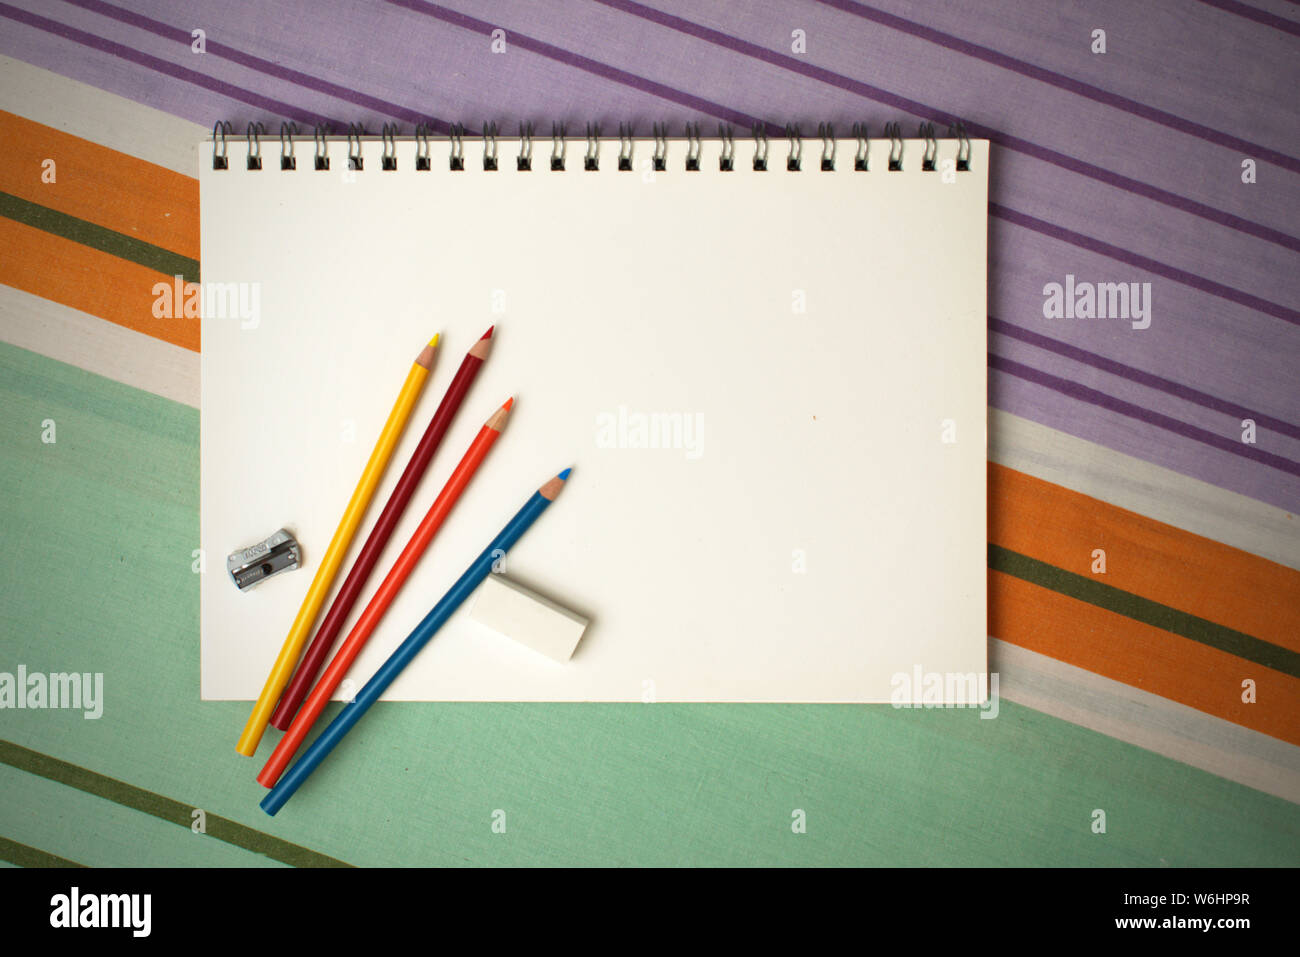 https://c8.alamy.com/comp/W6HP9R/spiral-sketch-pad-and-color-pencils-template-image-good-copy-space-back-to-school-homework-hand-drawing-artist-concept-W6HP9R.jpg